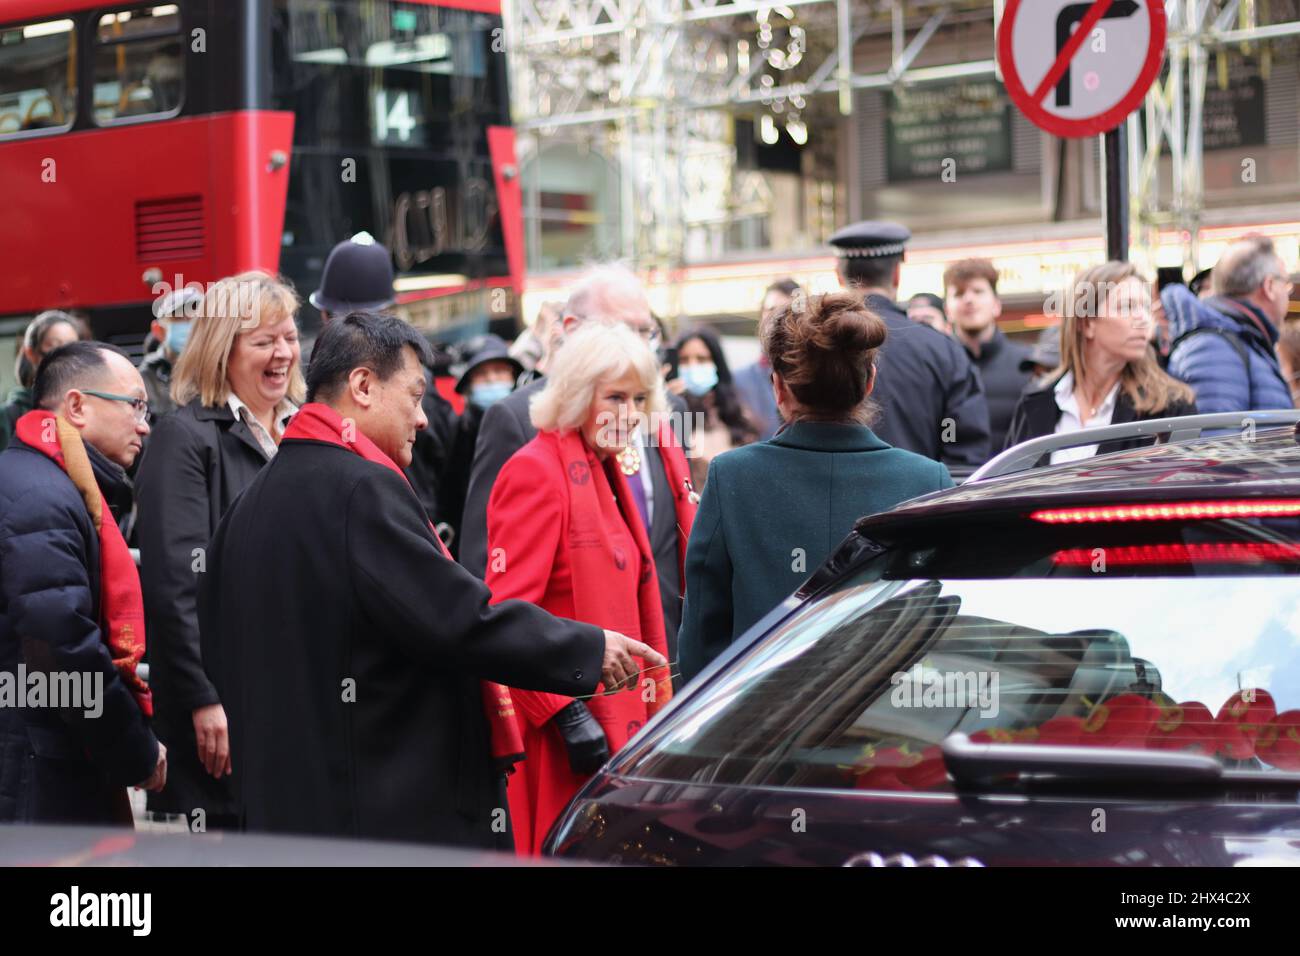 The Prince of Wales and the Duchess of Cornwall visit London's Chinatown to mark the start of the Lunar New Year 01/02/22 Stock Photo